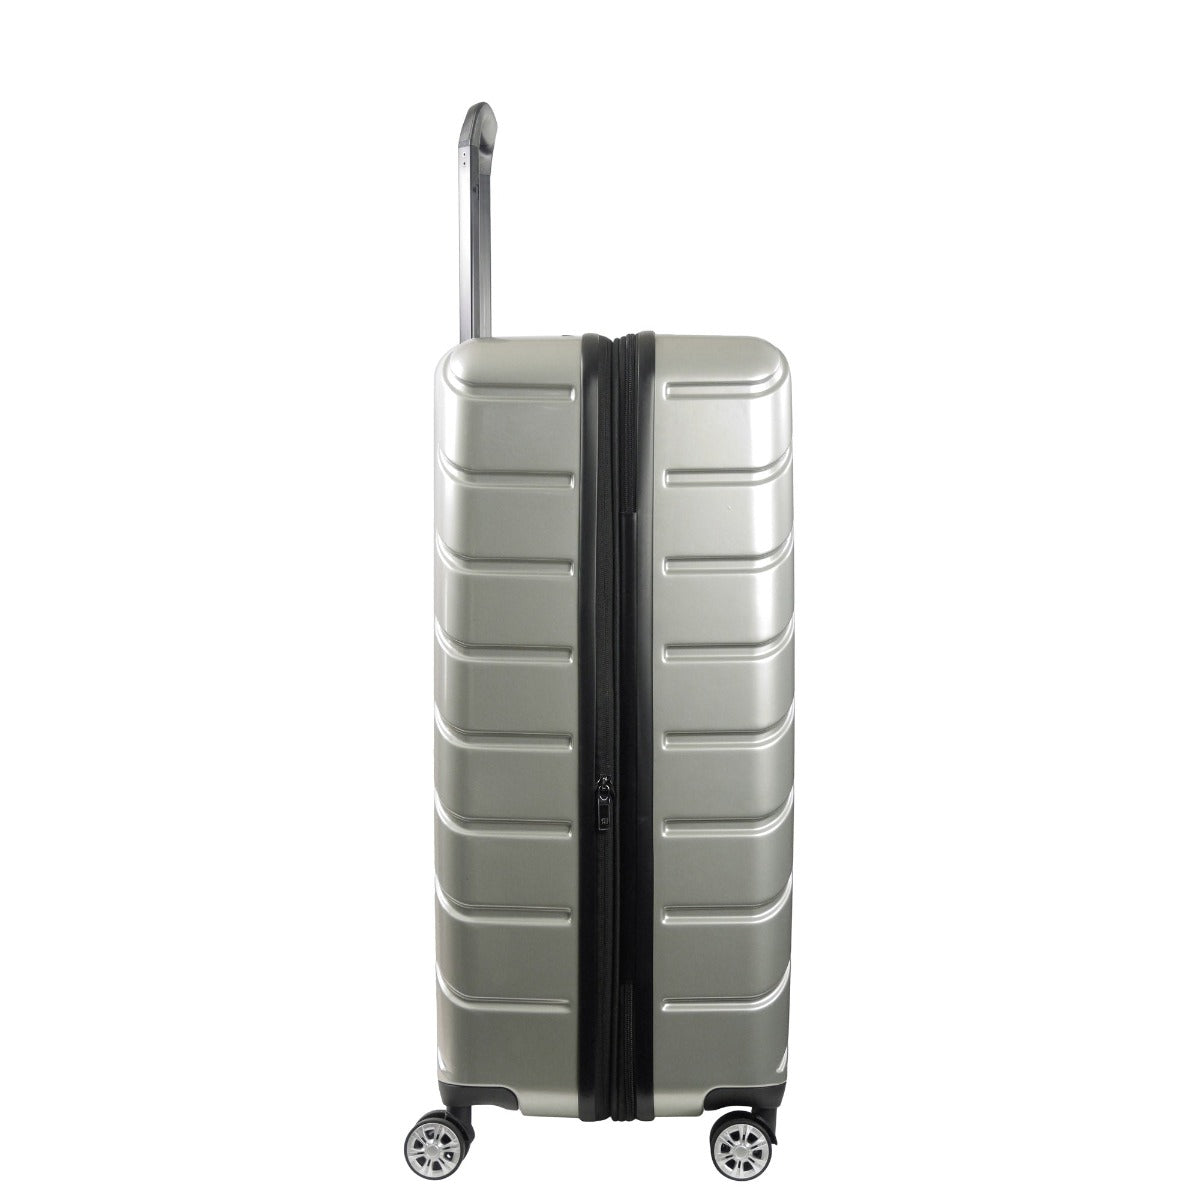 Velocity 31" Hardside Spinner Checked Luggage Suitcase Silver